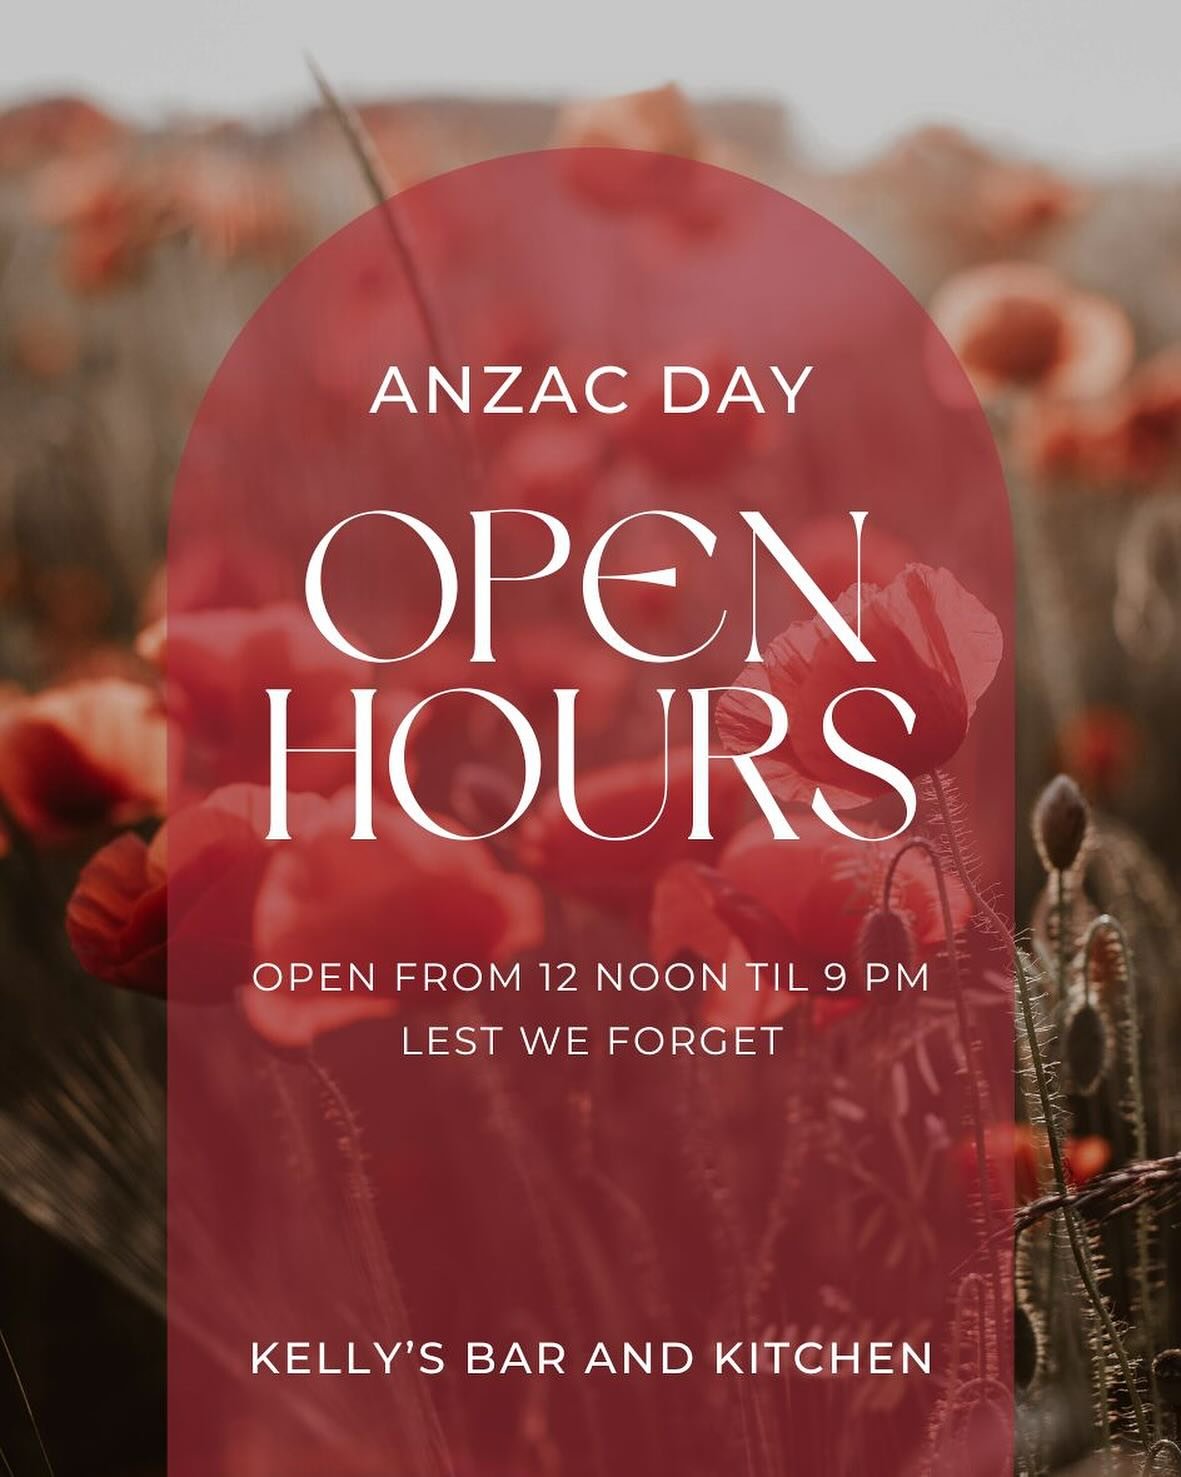 Lest We Forget

We pay our respects to all the service men and women who have served for our country over the years

We will be open today from 12 noon - 9pm please call 9751 1056 or go to our website to make a booking